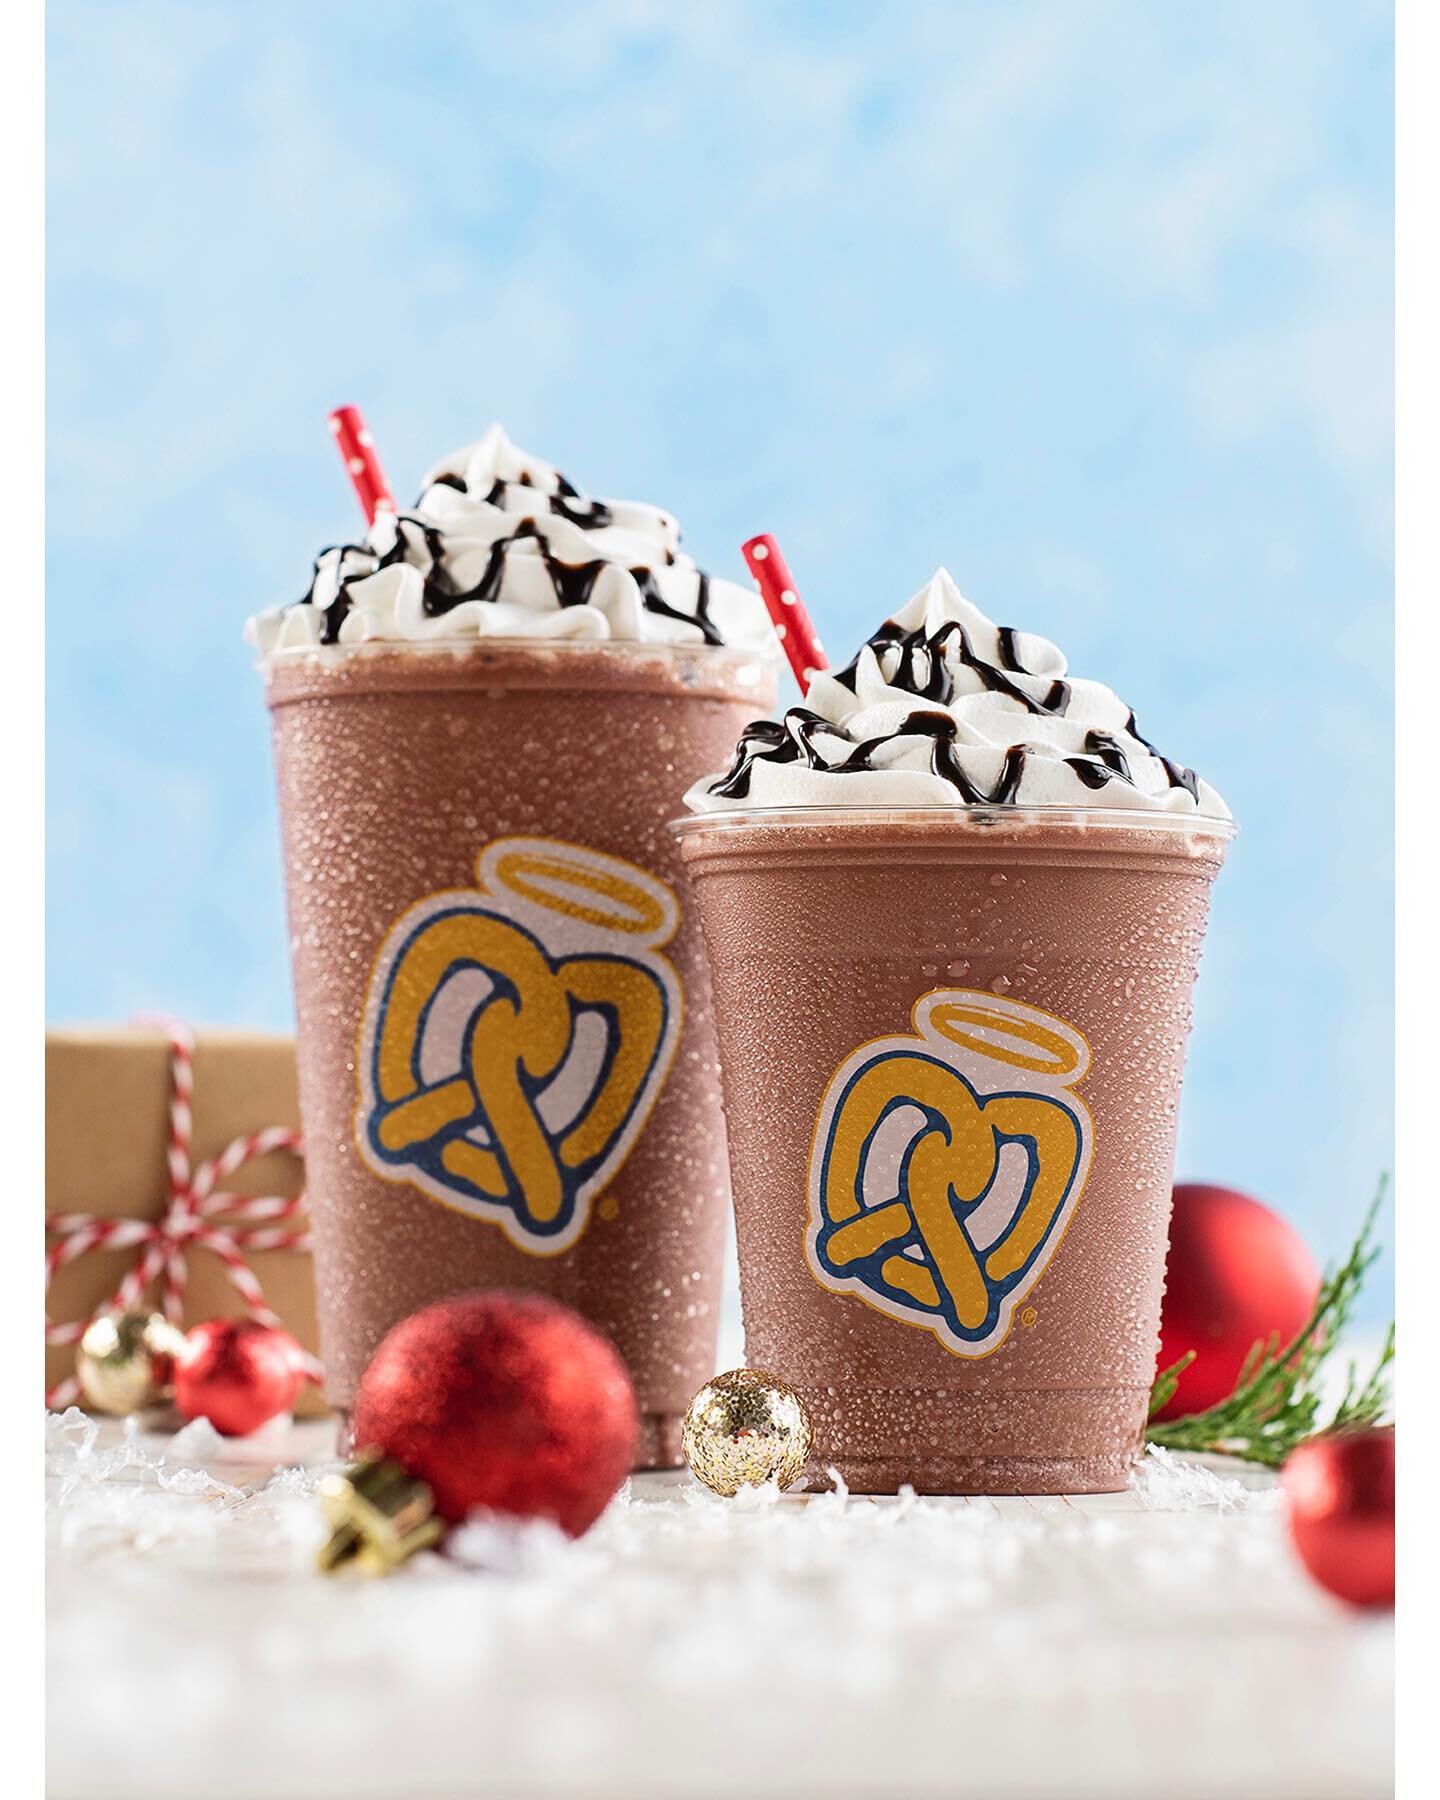 Introducing &ldquo;Hot Chocolate Frost&rdquo; &mdash; this week marks the launch of a brand new product and a new campaign of images I helped create for @auntieannespretzels. Get them while they&rsquo;re cold &mdash; in stores now through the holiday